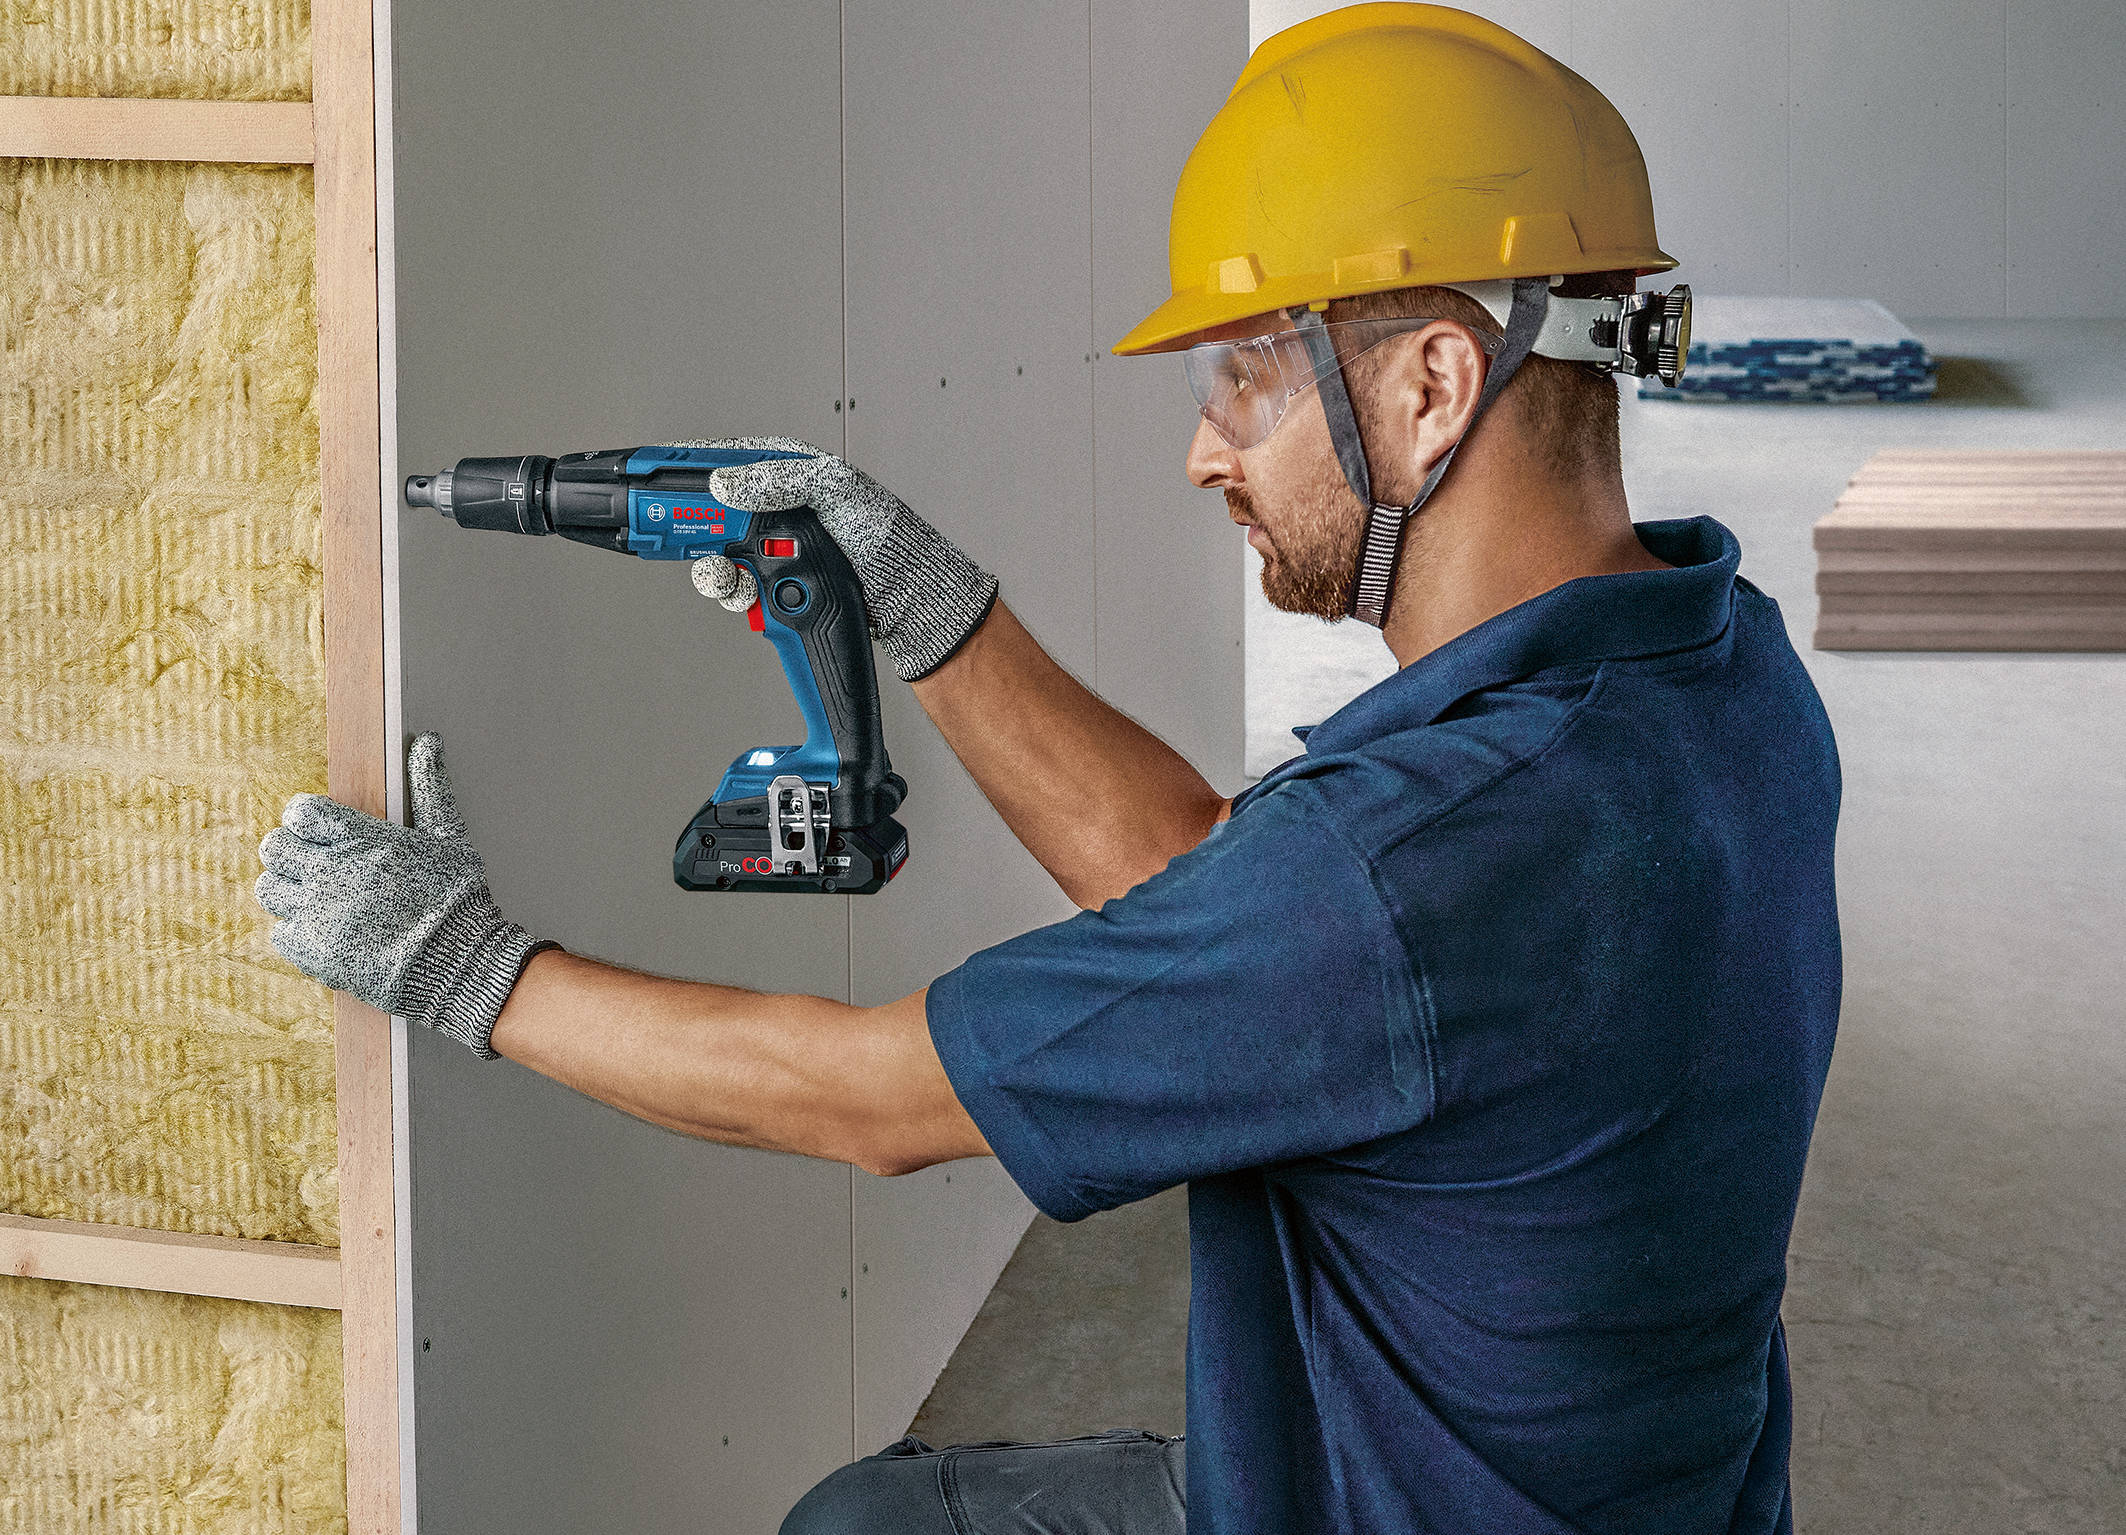 Easier screwdriving: GTB 18V-45 Professional cordless drywall screwdriver from Bosch for professionals